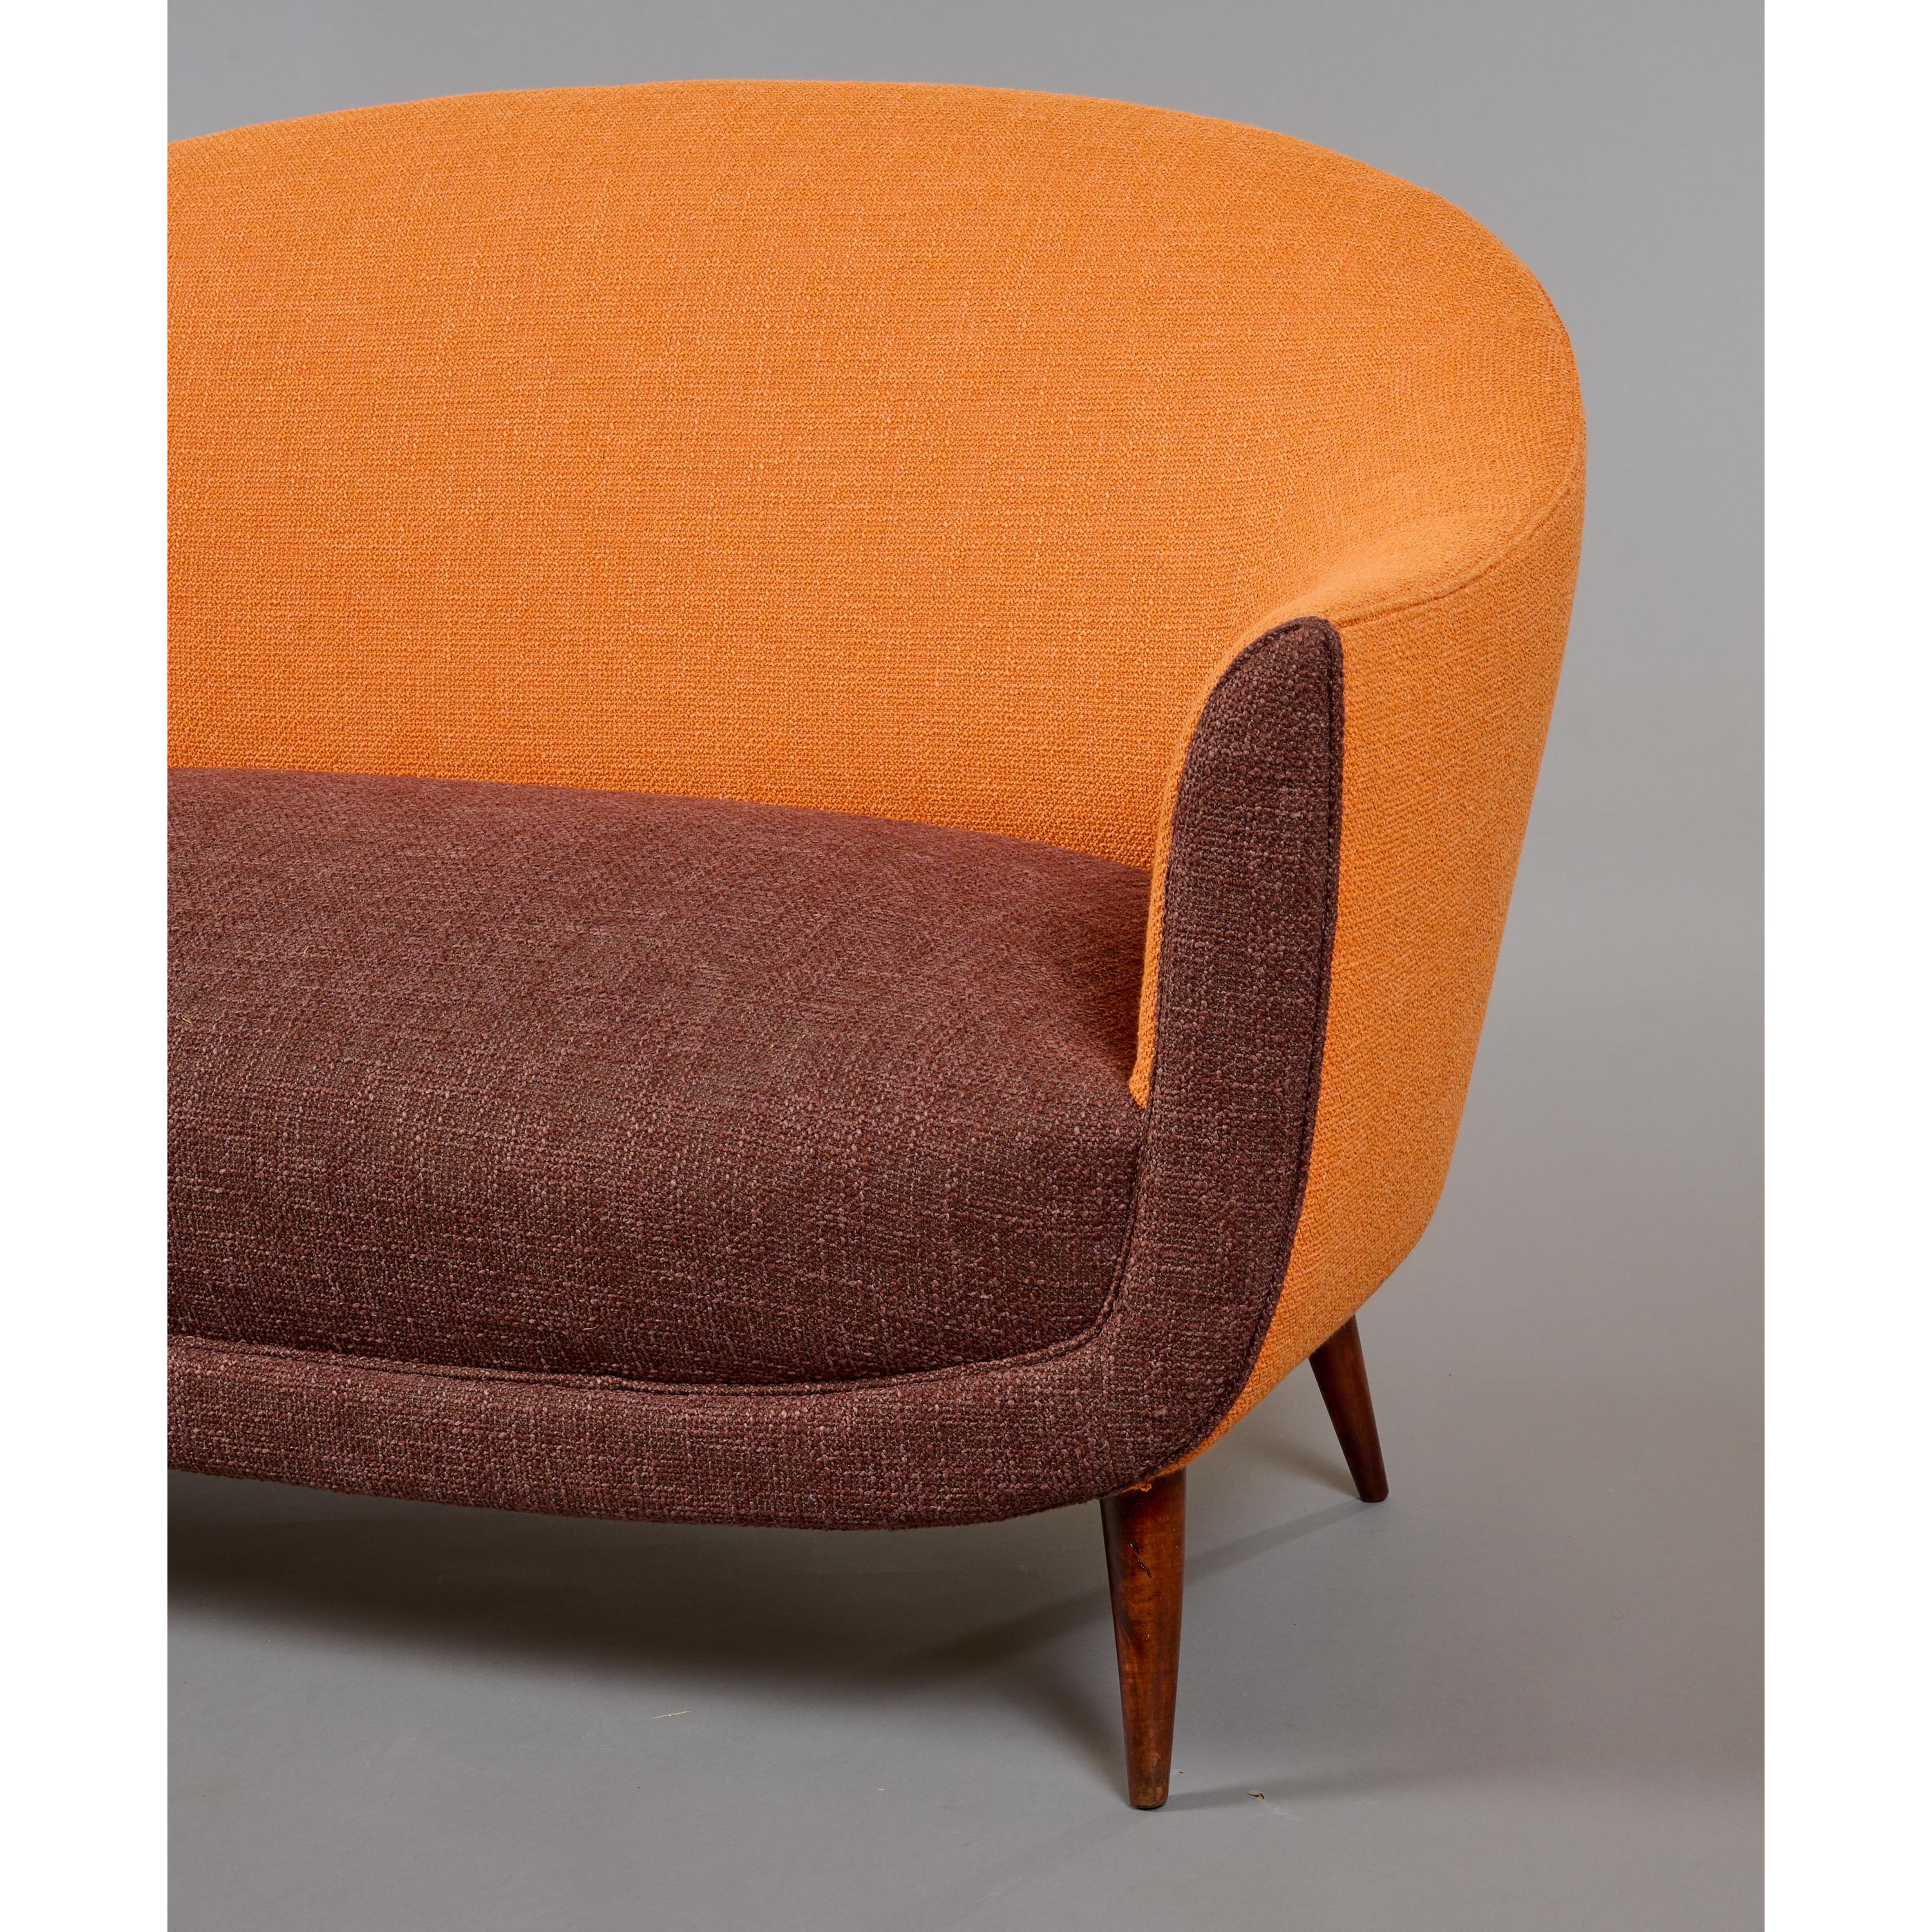 Curved ITSO Federico Munari Settee in Wood with Orange Upholstery, Italy 1950s  For Sale 4